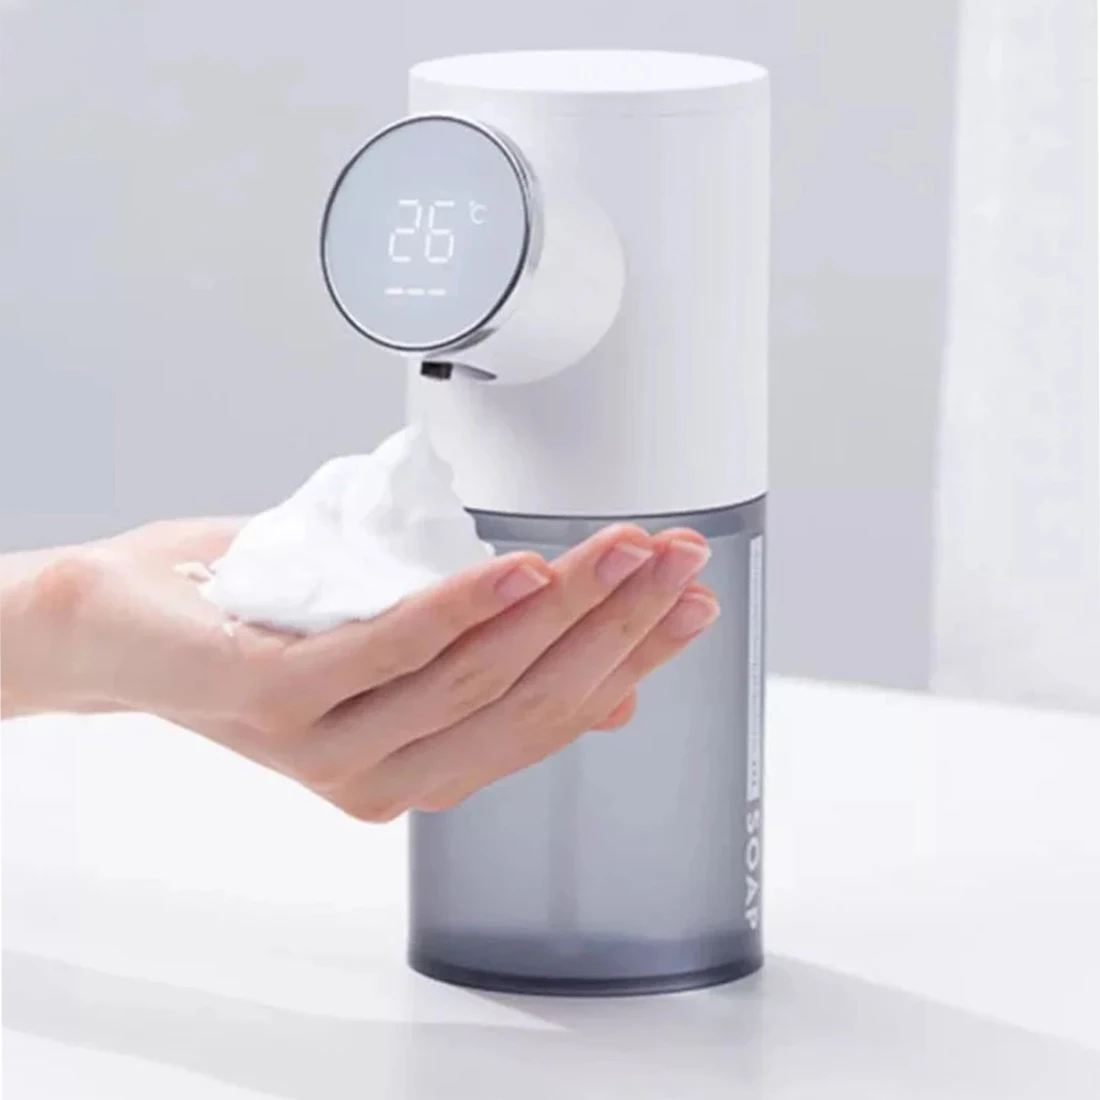 Mi Soap Dispenser USB Rechargeable 320ml Liquid Soap Dispenser Digital Display Foam Infrared Sensor Hand Sanitizer Machine hst 8865 non contact digital thermometer laser lcd display laser infrared thermometer for industry